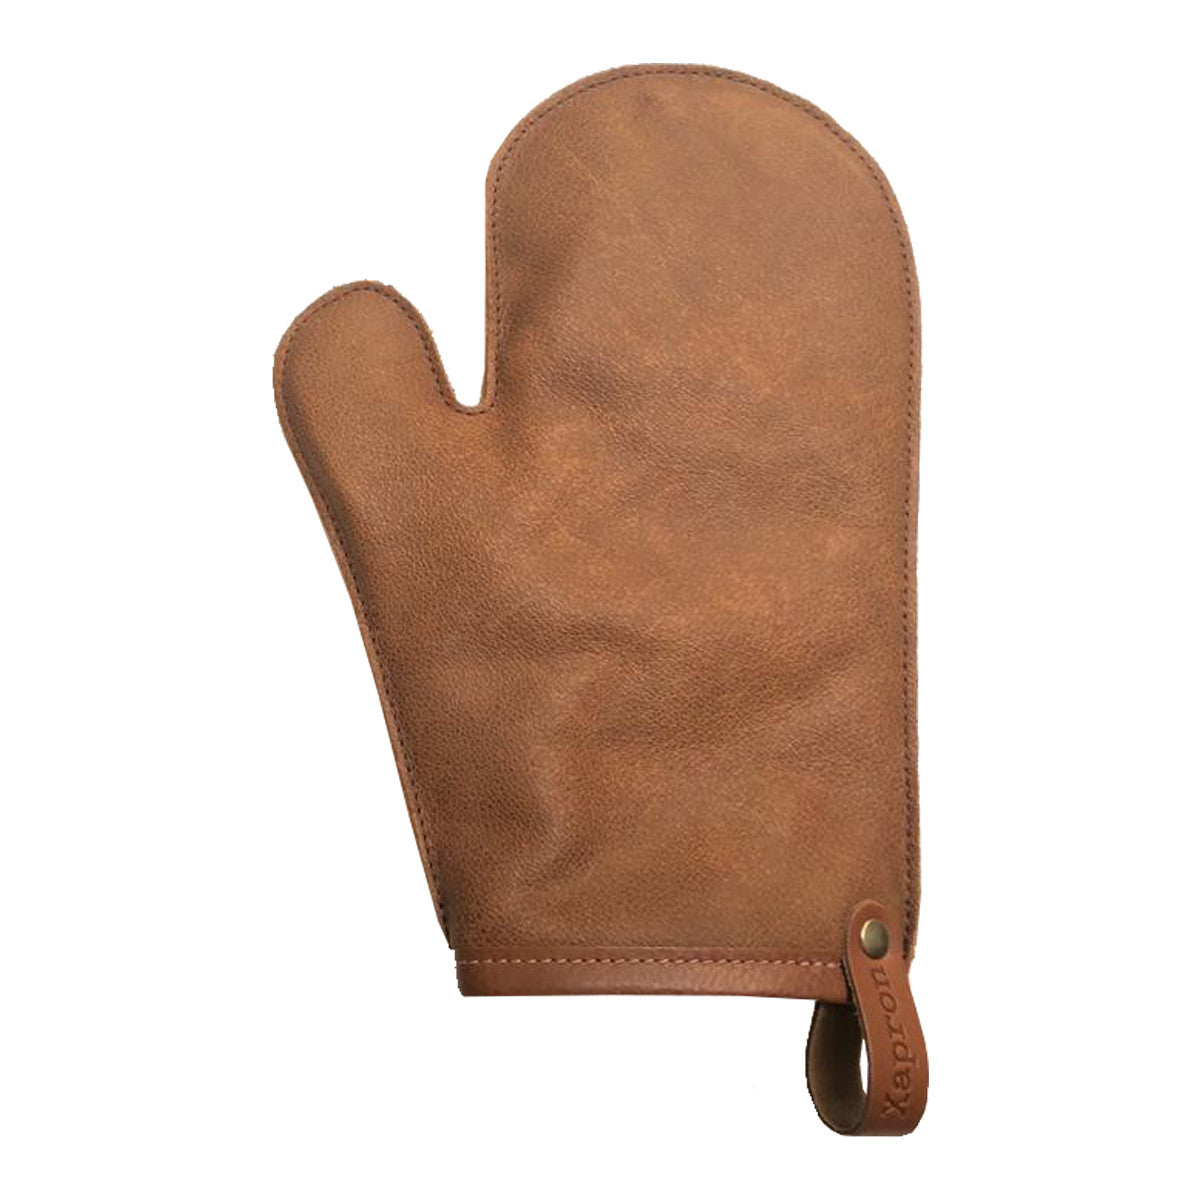 OVEN GLOVE, leather brown